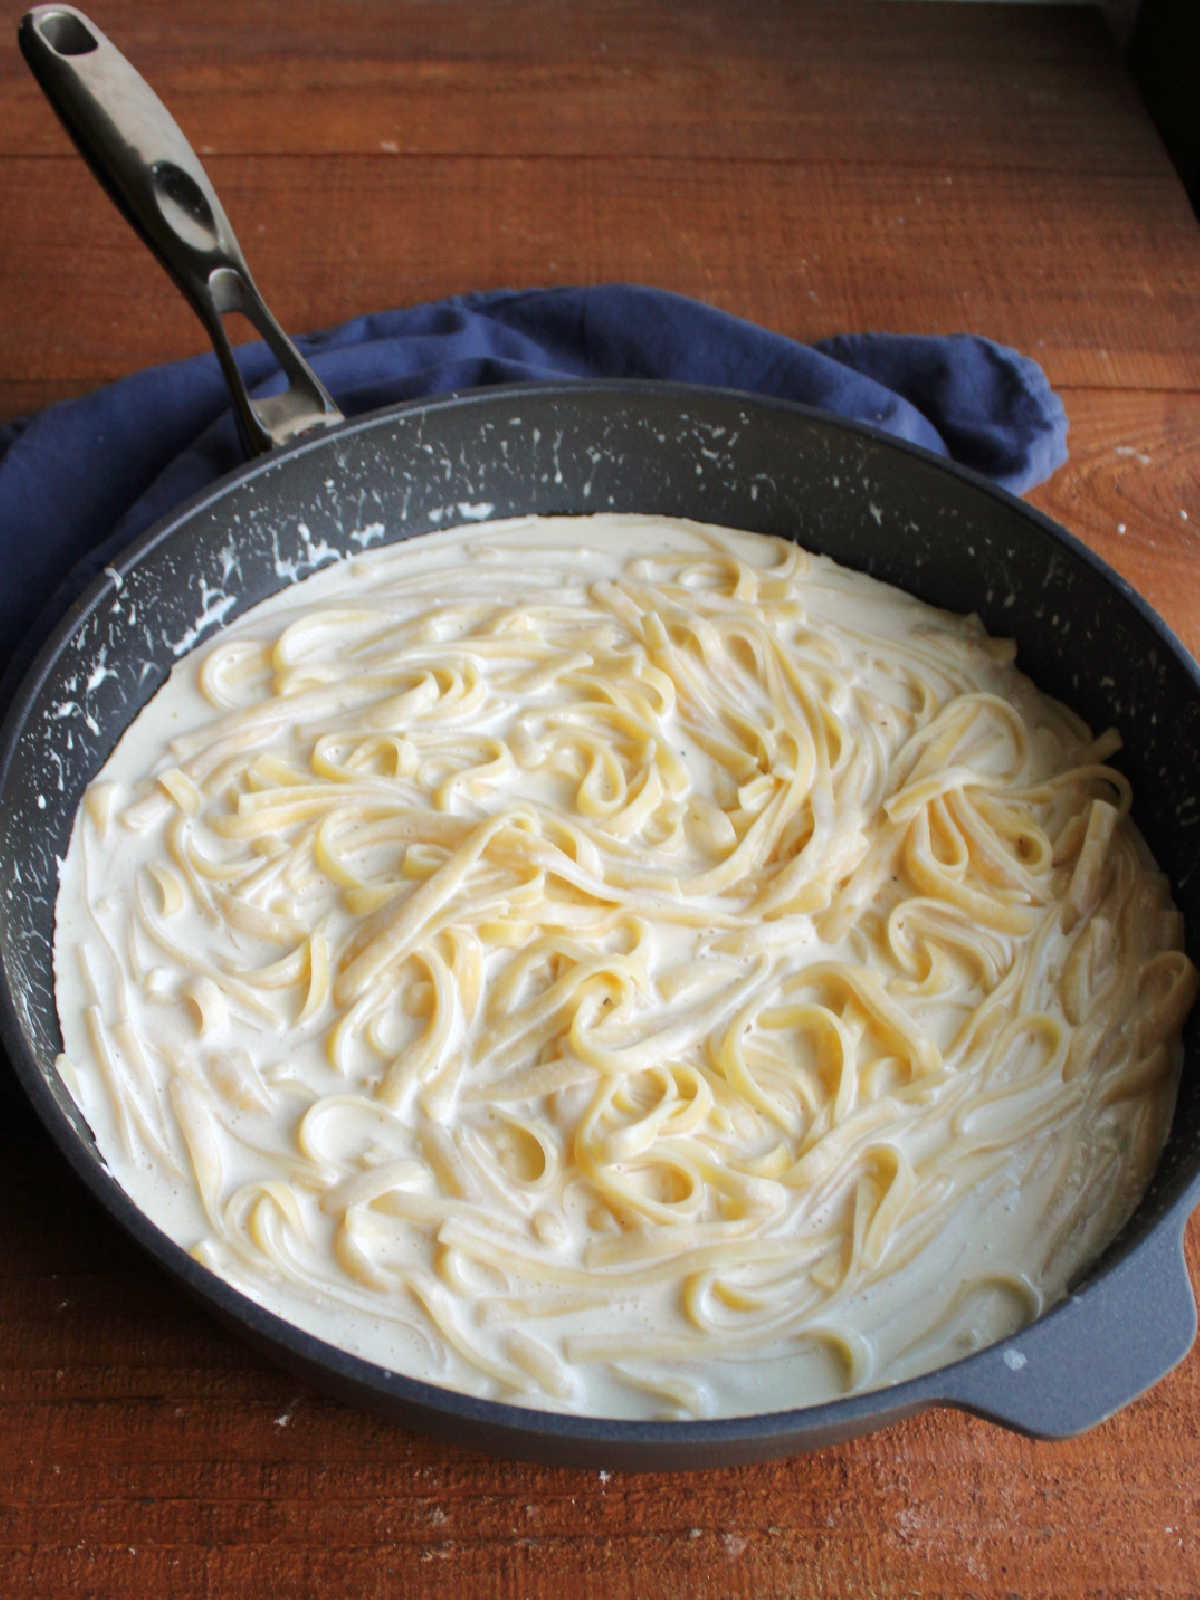 Pan of creamy fettuccine alfredo pasta with smooth creamy white sauce.